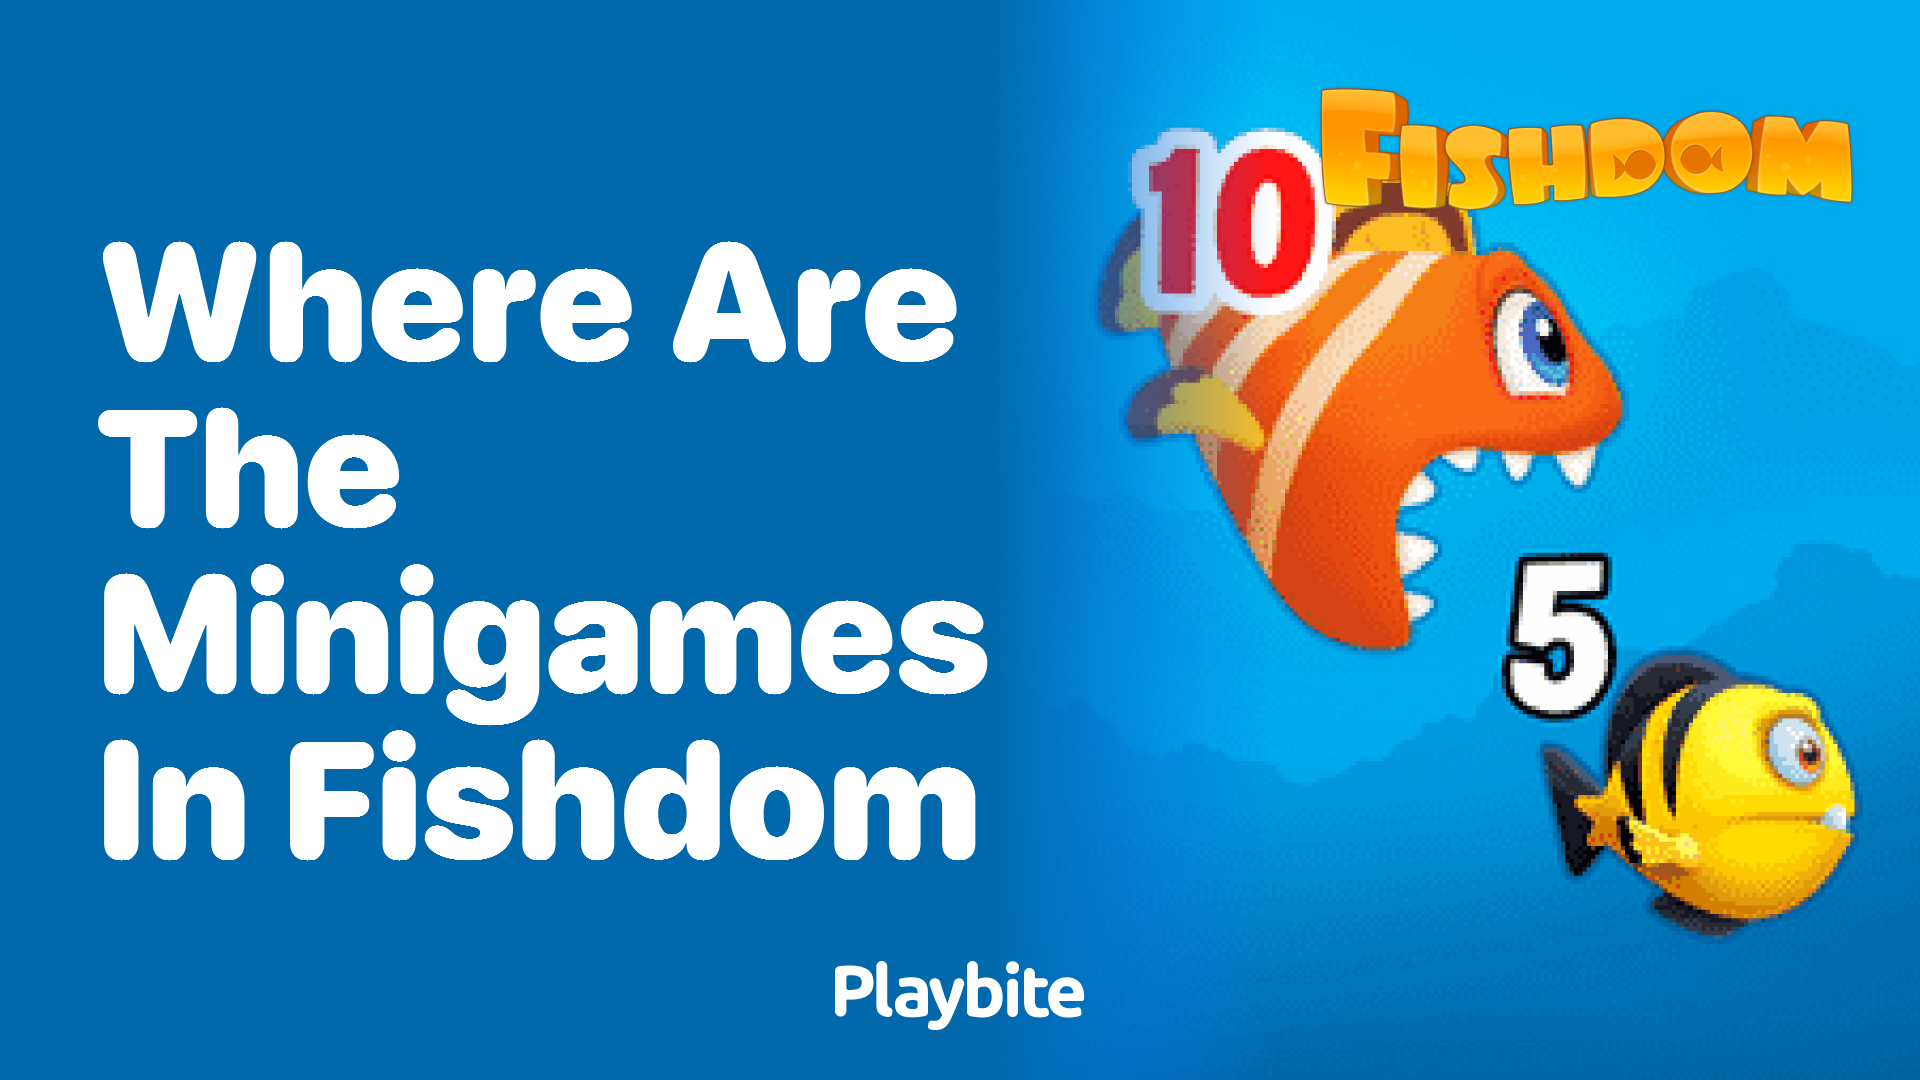 Where Are the Minigames in Fishdom? Find Them Easily!